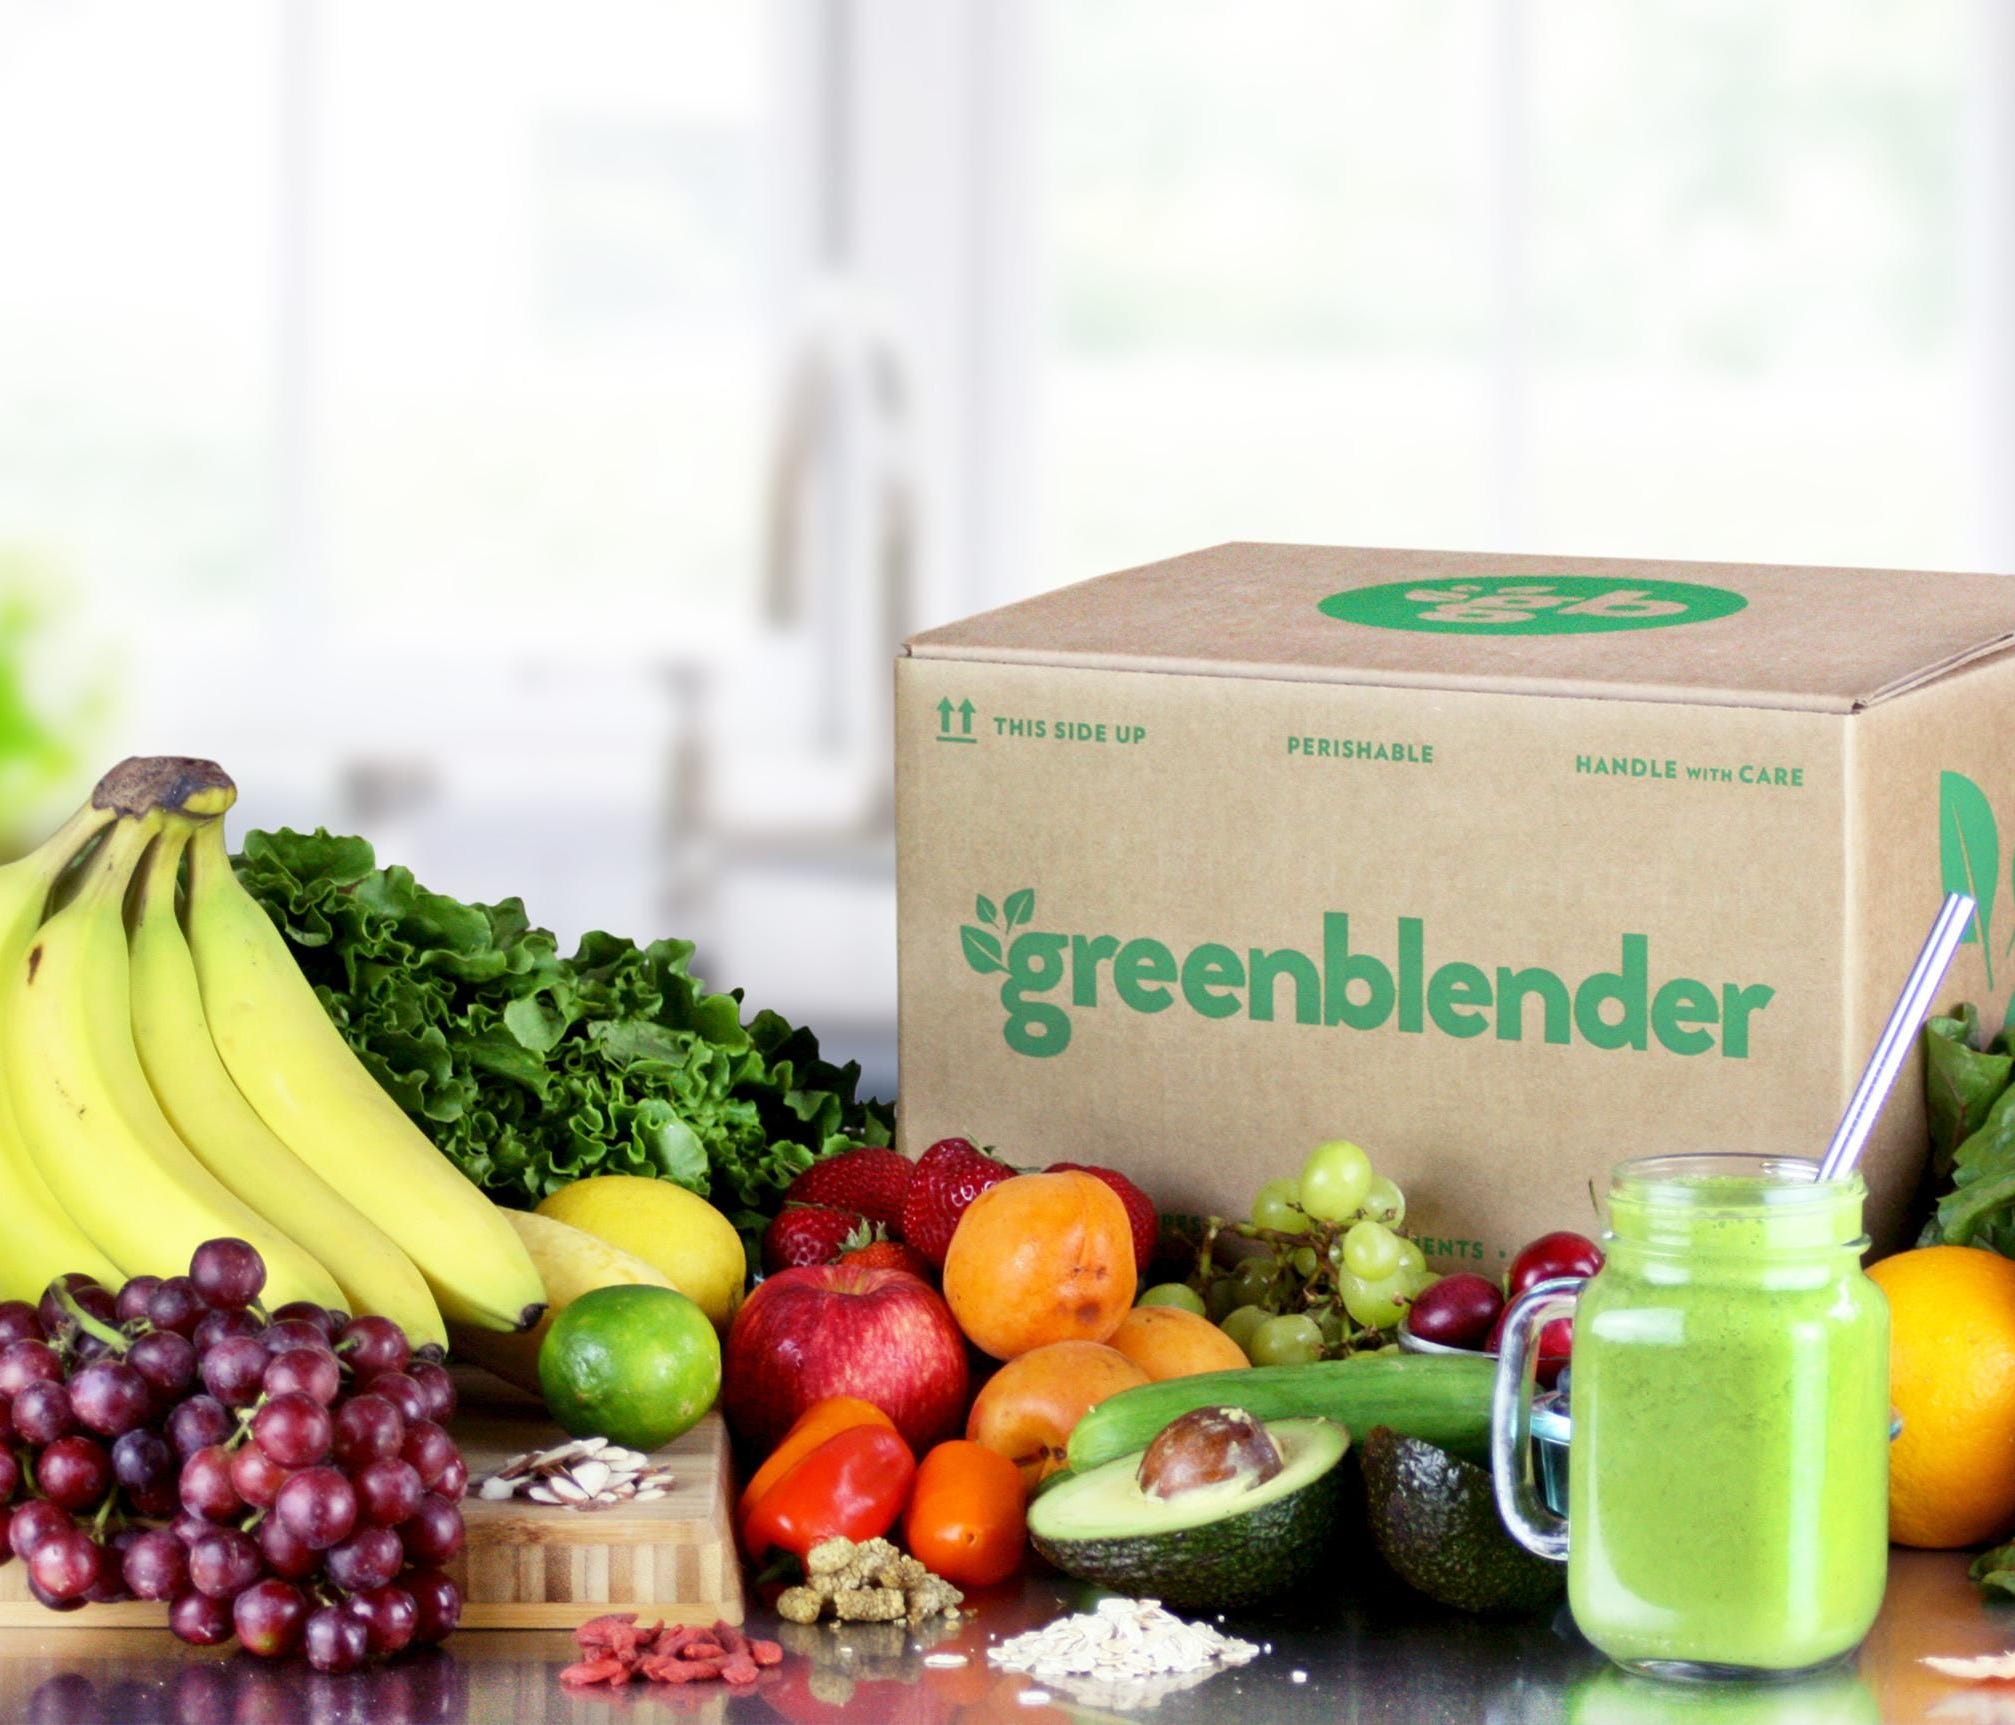 Greenblender sends you all the fresh ingredients for making five 2-serving smoothies.